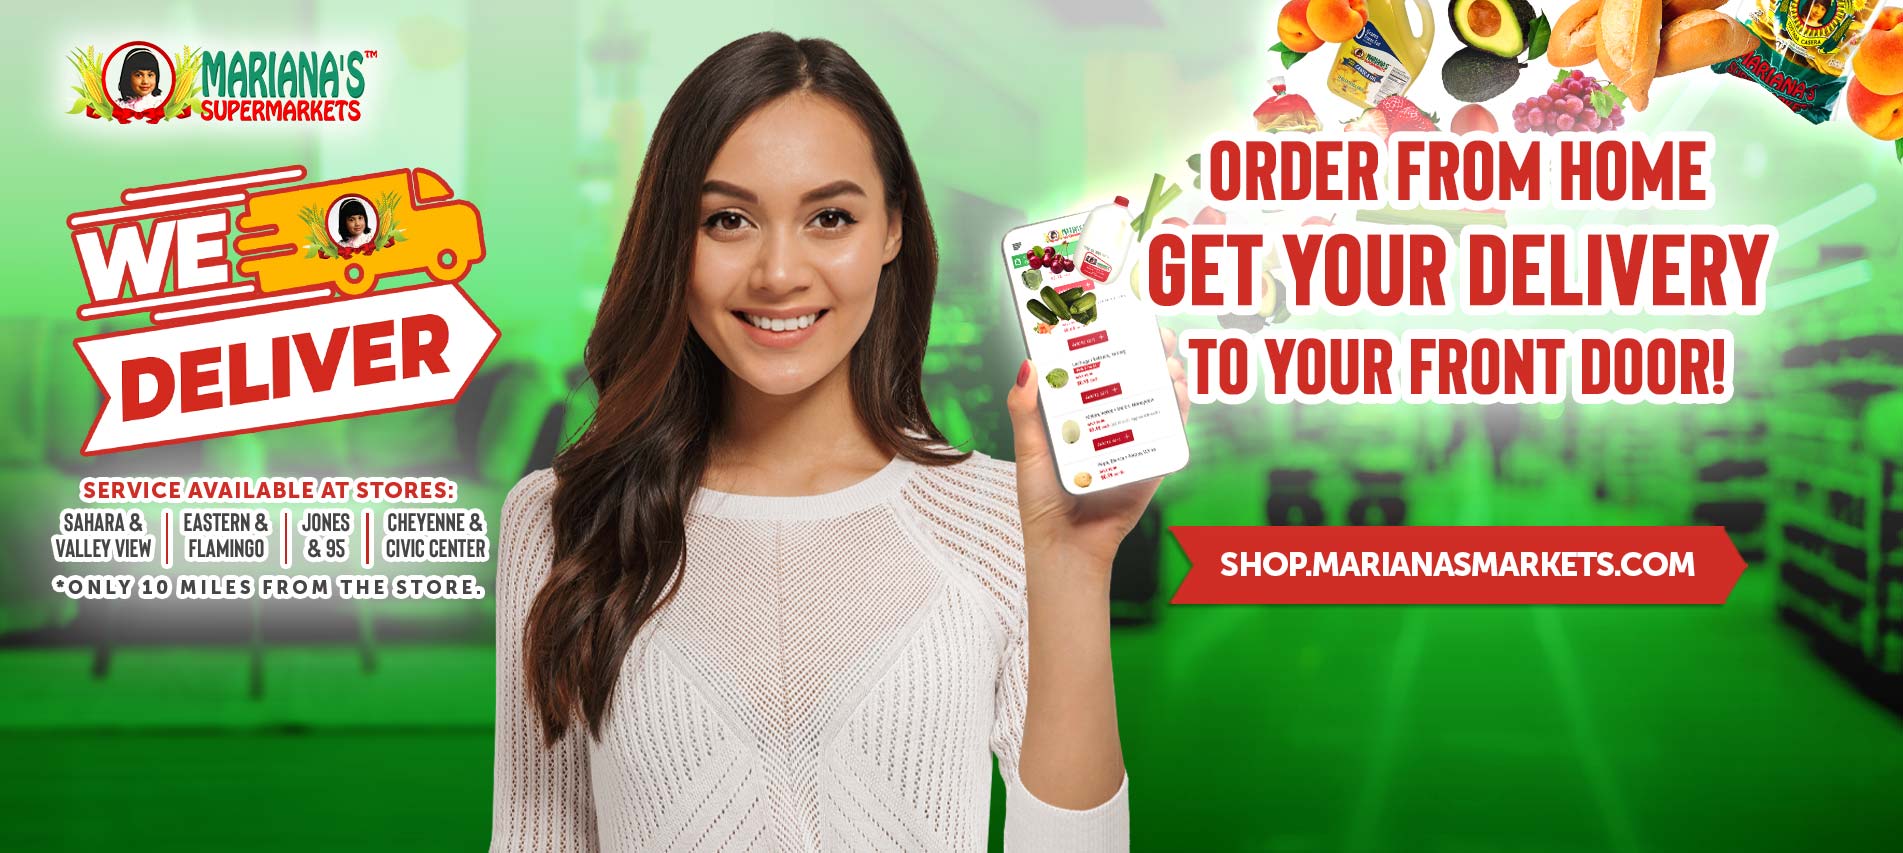 Free deliveryOrder from home get free delivery to your front door! https://shop.marianasmarkets.com only at there locations sahara & valley view, eastern & flamingo, jones & 95, cheyenne & civic center. only 10 miles from the store.